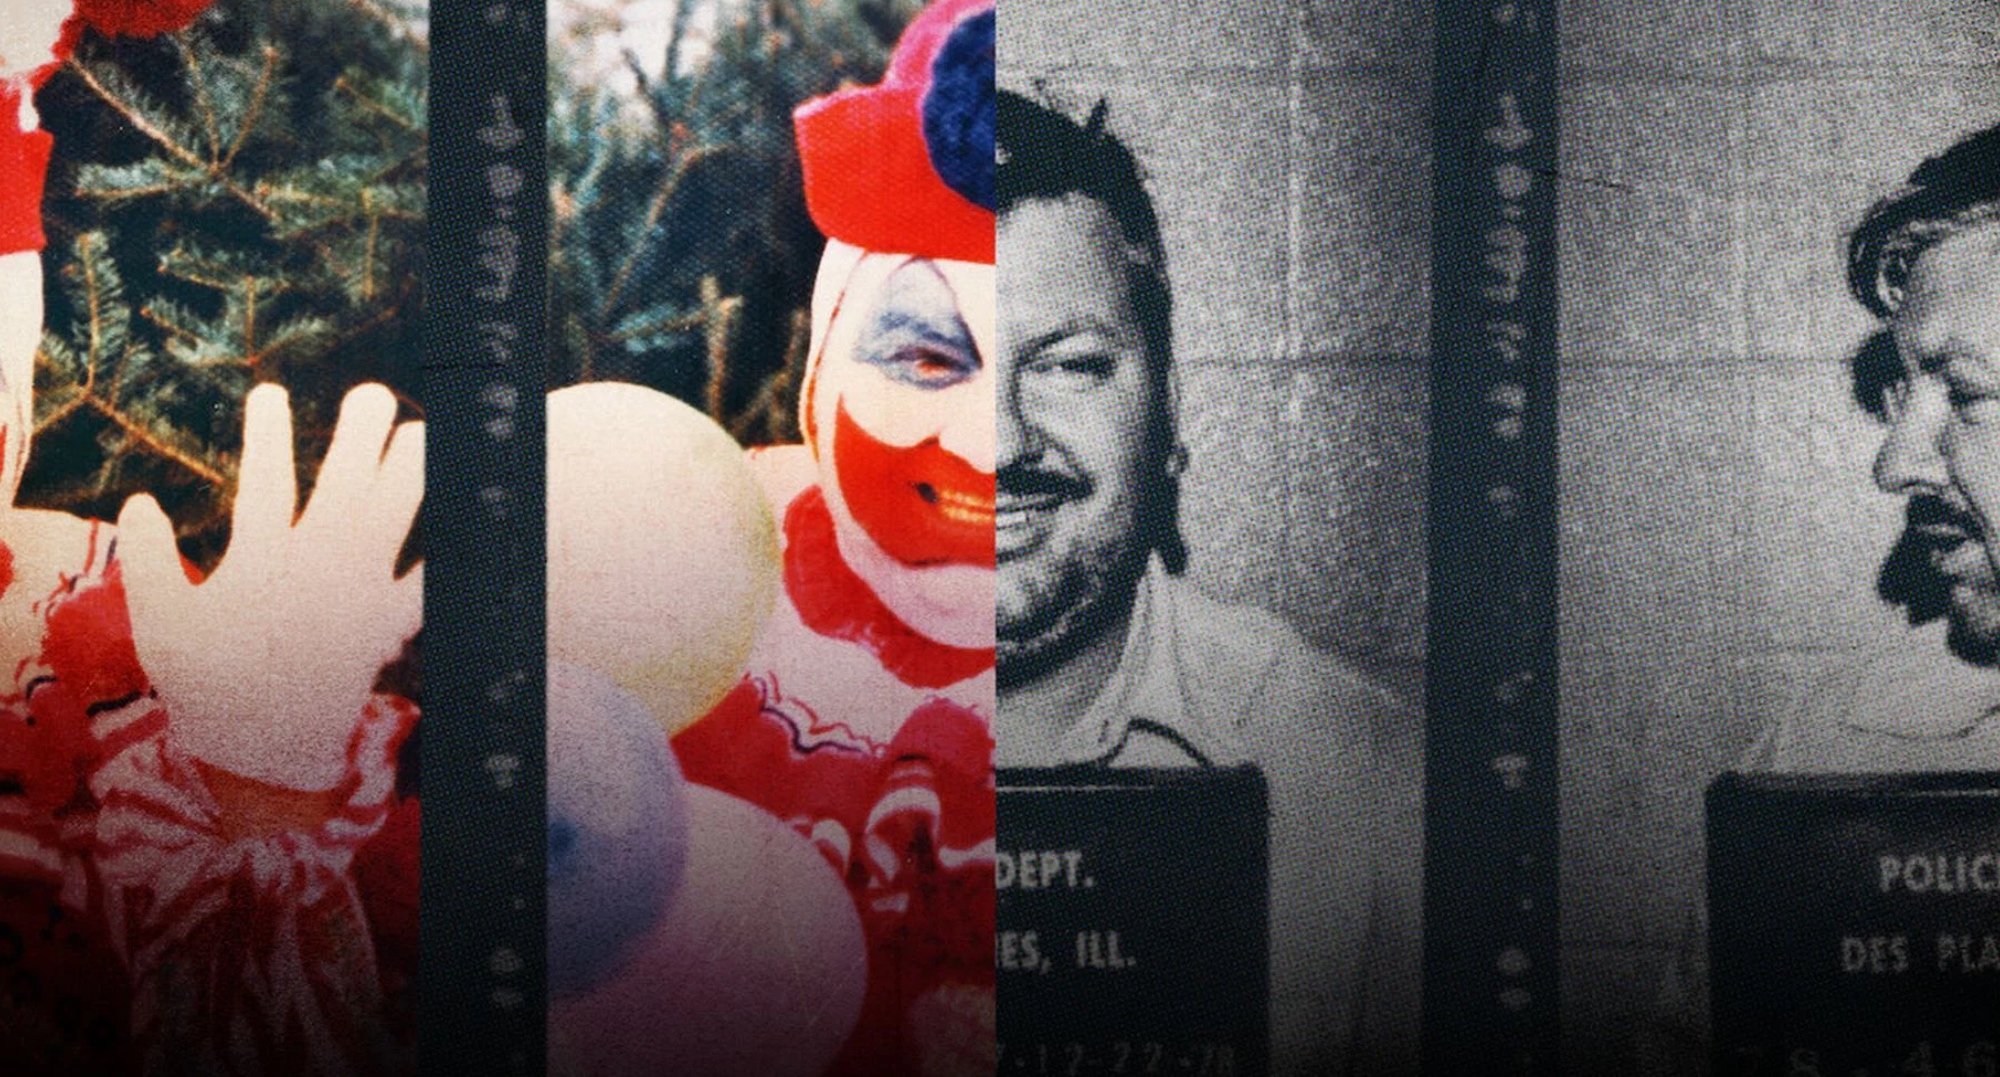 John Wayne Gacy in 'Conversations with a Killer' for 'Monster' Season 2.